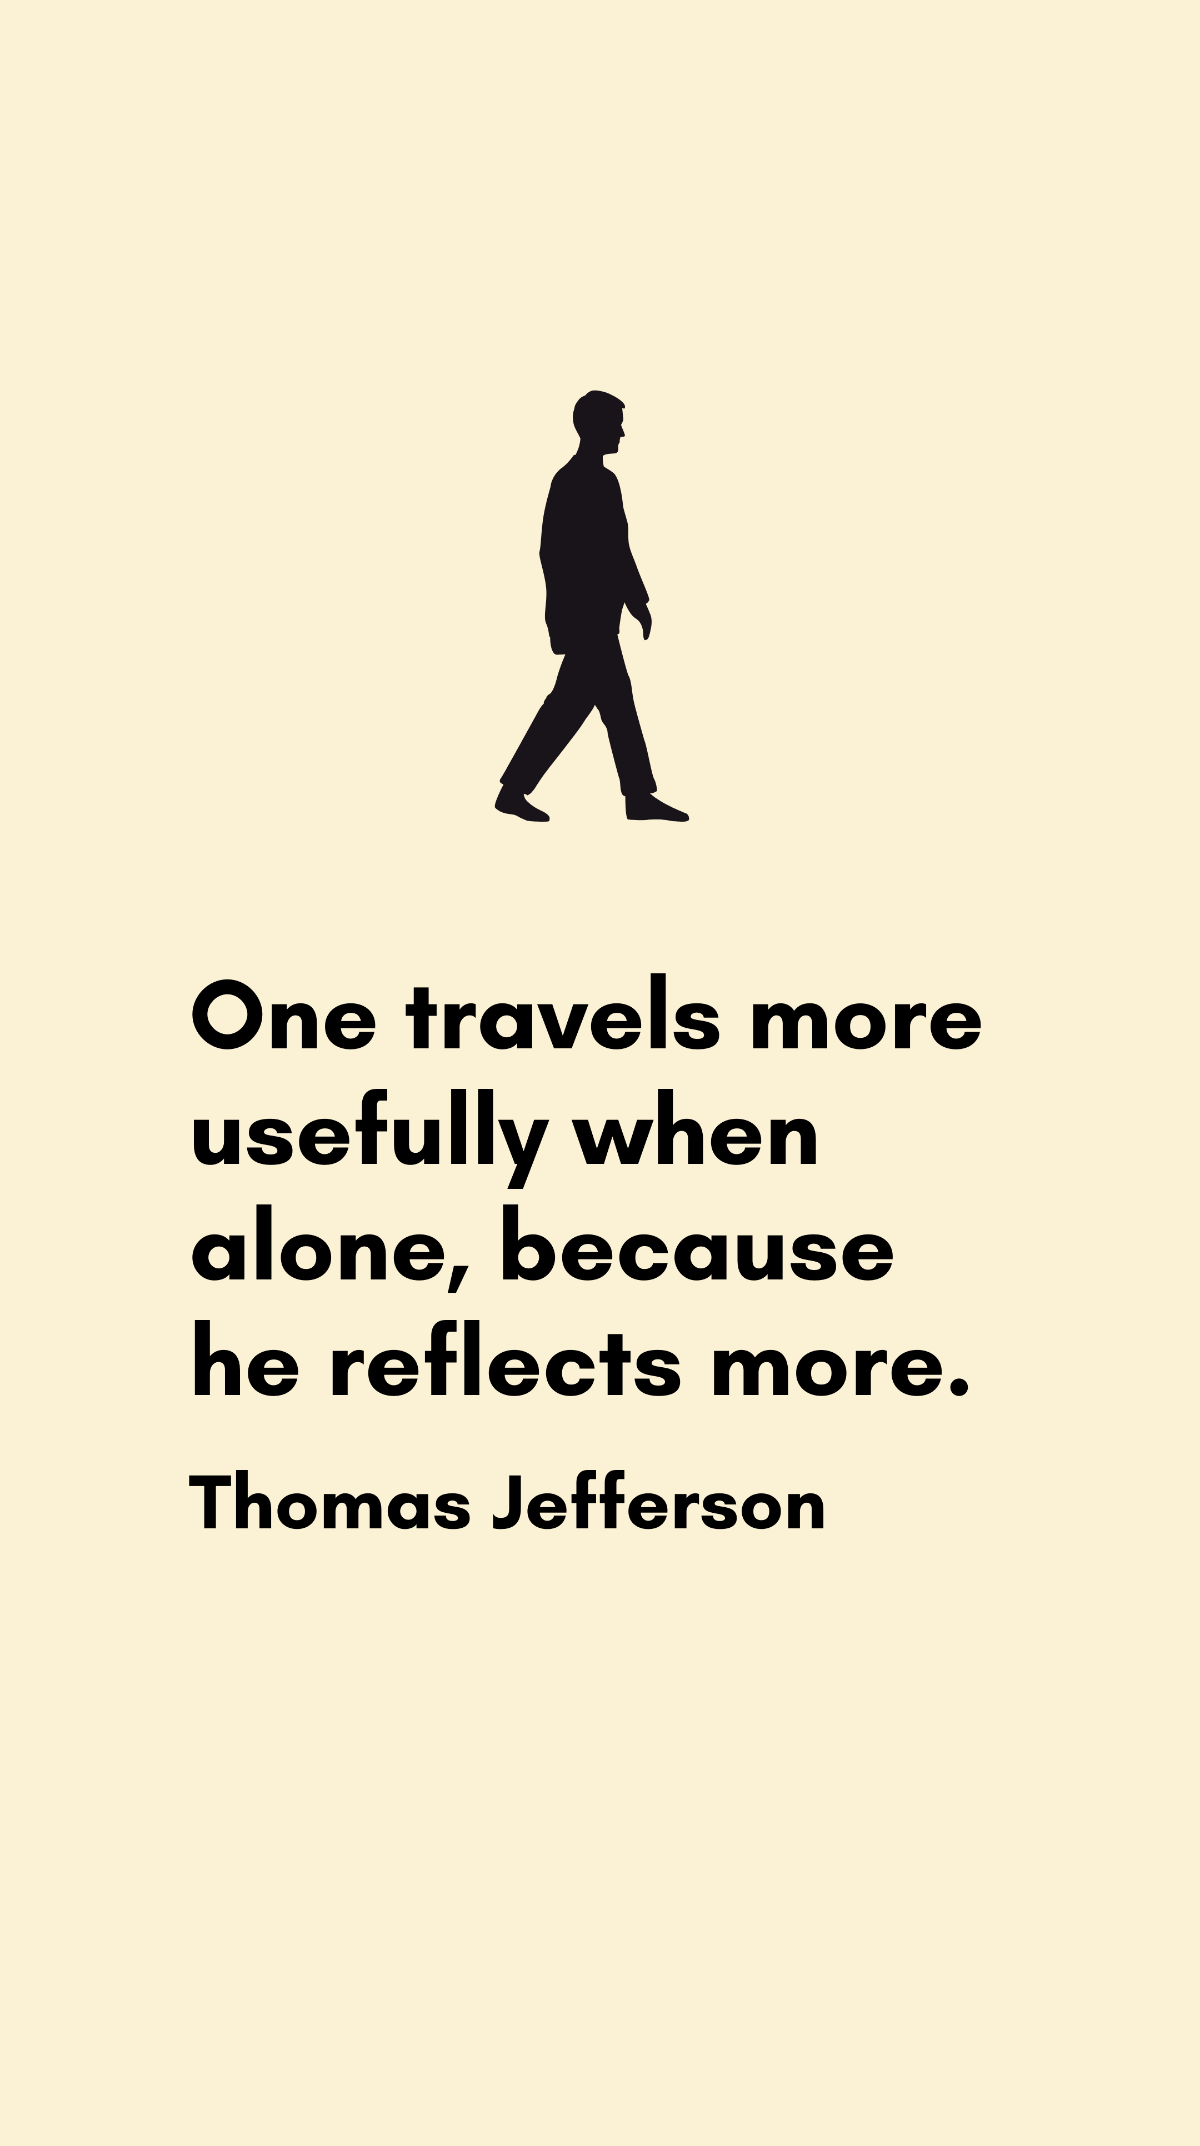 Thomas Jefferson - One travels more usefully when alone, because he reflects more. Template